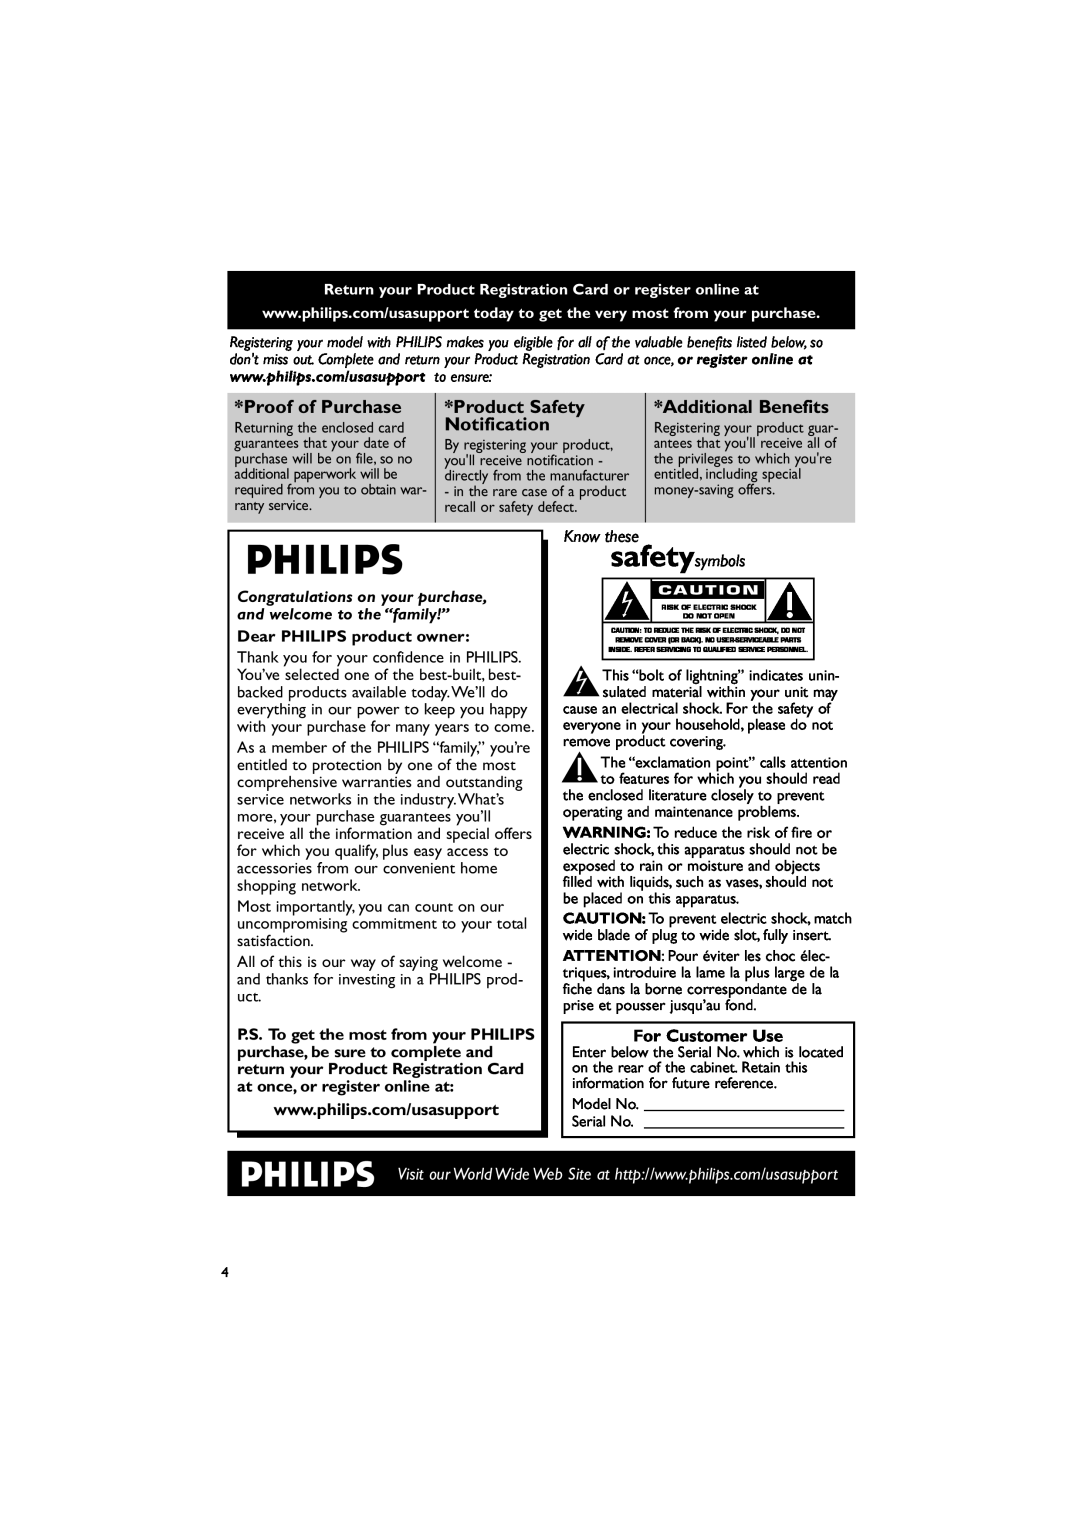 Philips MCM108DB/37 owner manual For Customer Use, Proof of Purchase, Product Safety, Additional Benefits, Notification 